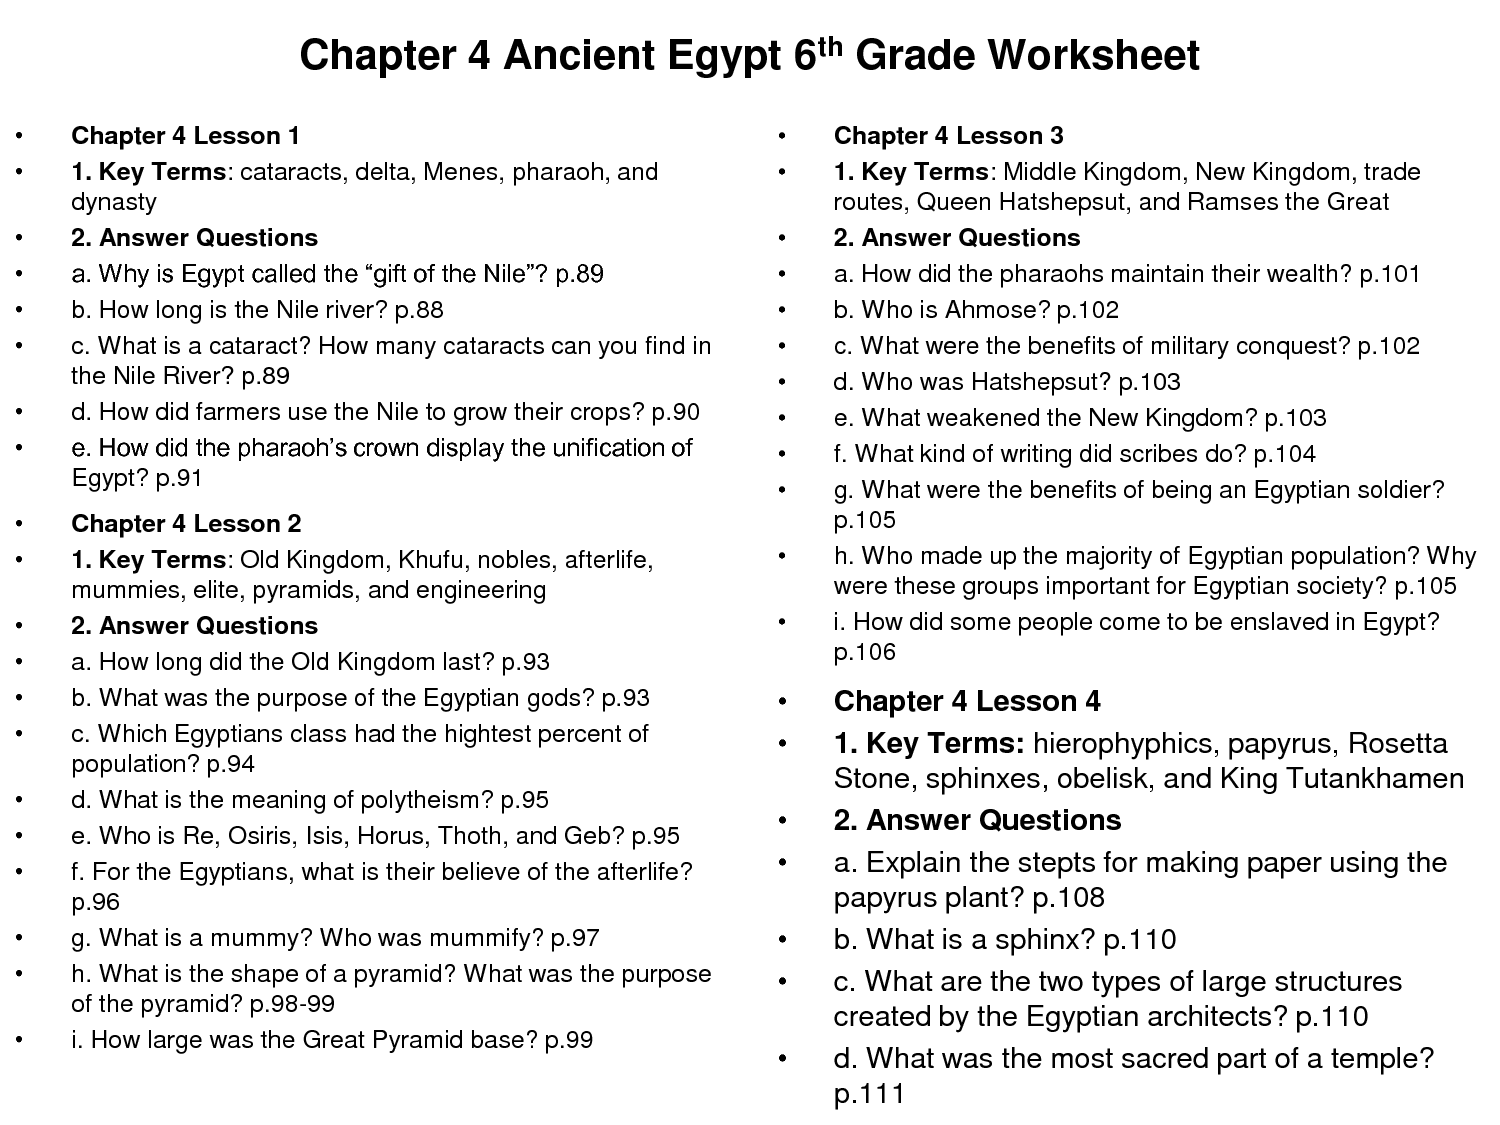 13 Best Images of 6th Grade Geography Worksheets  7th Grade Map Skills Worksheets, 6th Grade 